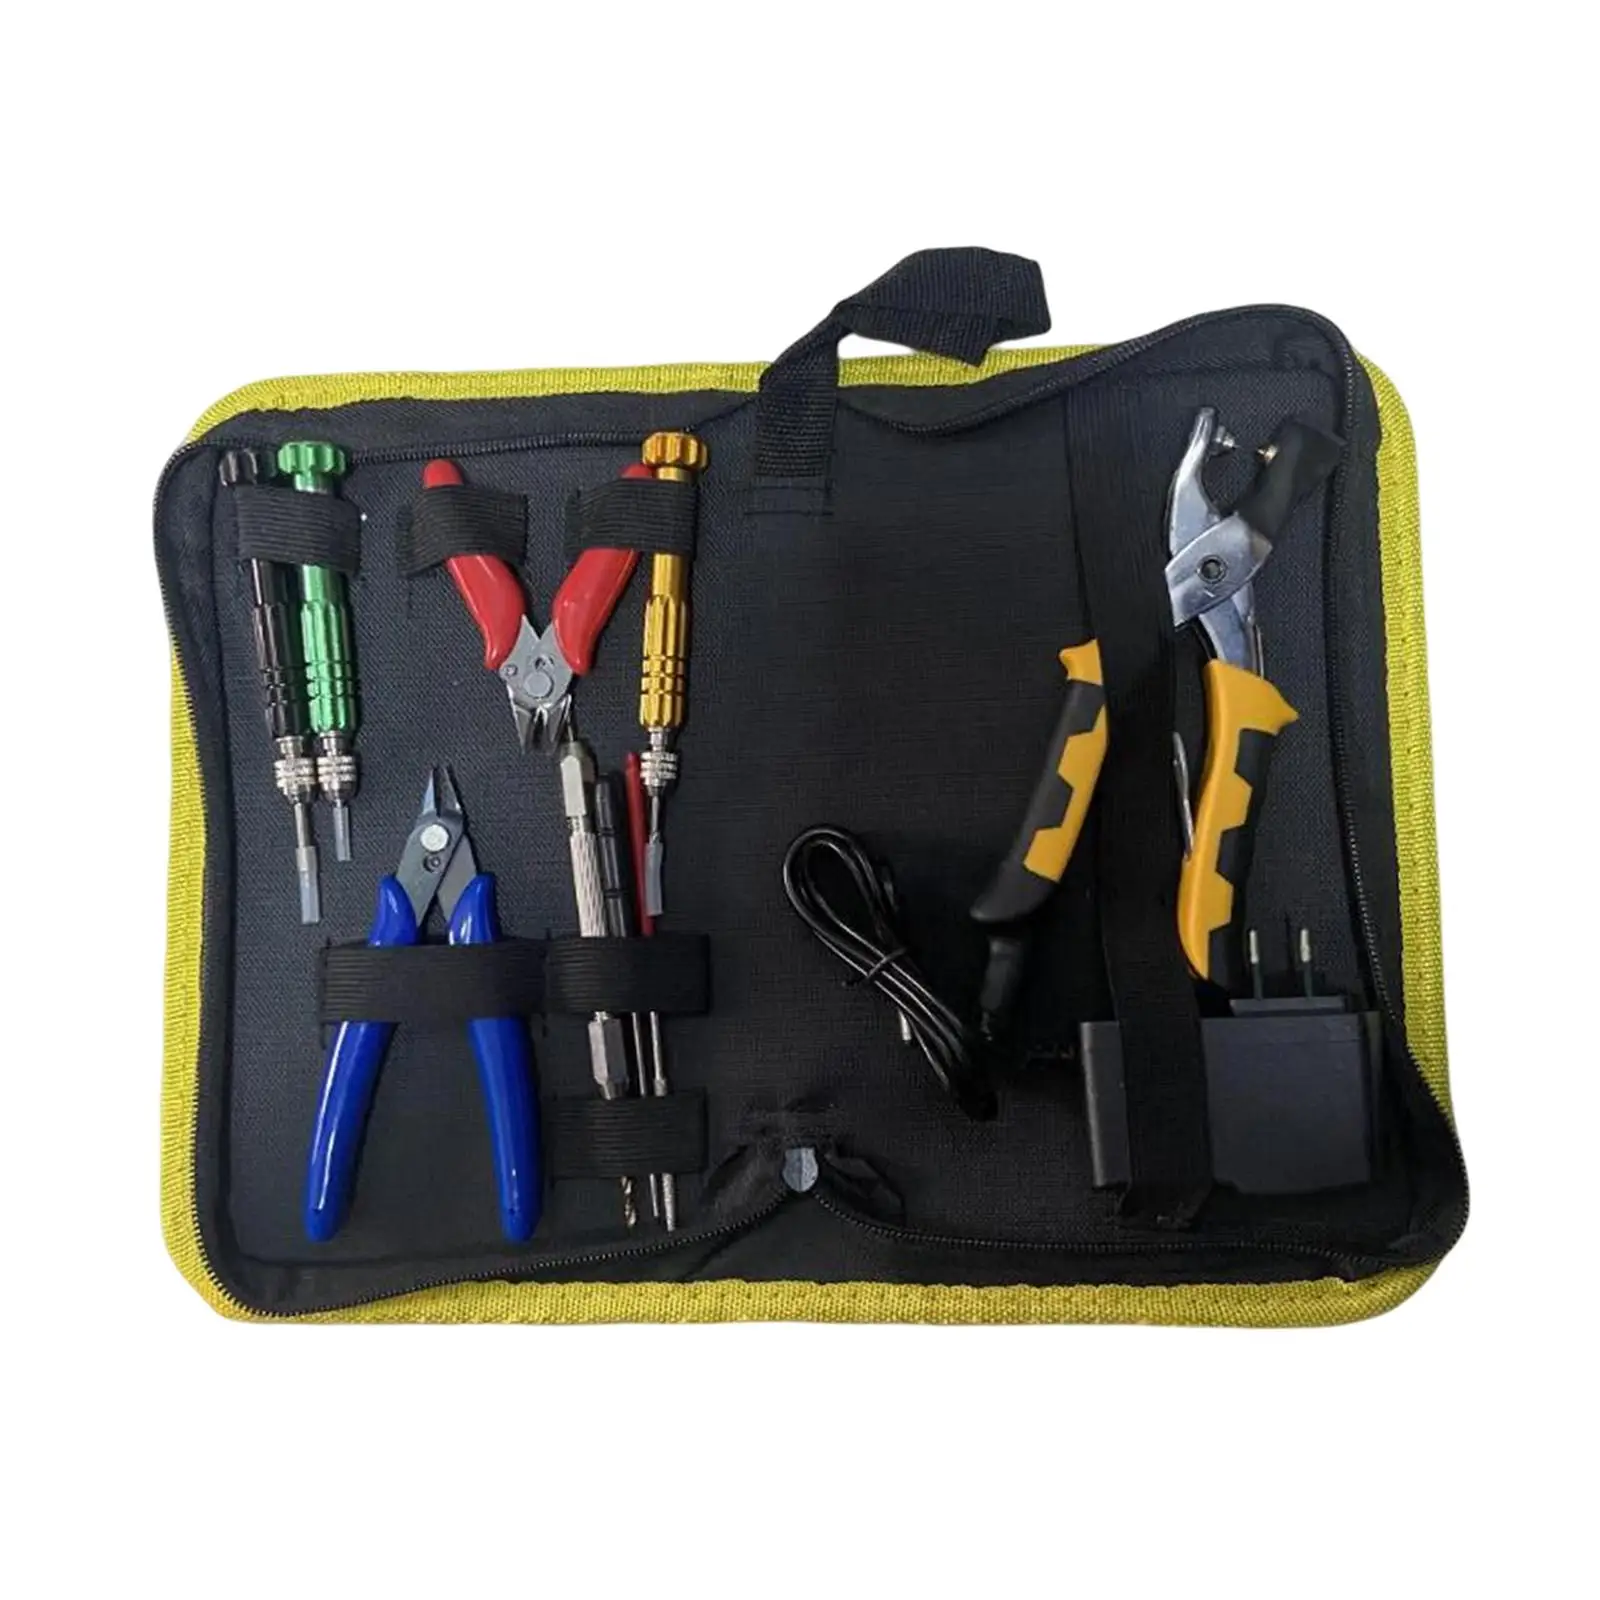 Starting Stringing Clamp Tool Kit Stringing Machine Tools Professional Metal Cold Press Badminton Racket Pliers for Outdoor